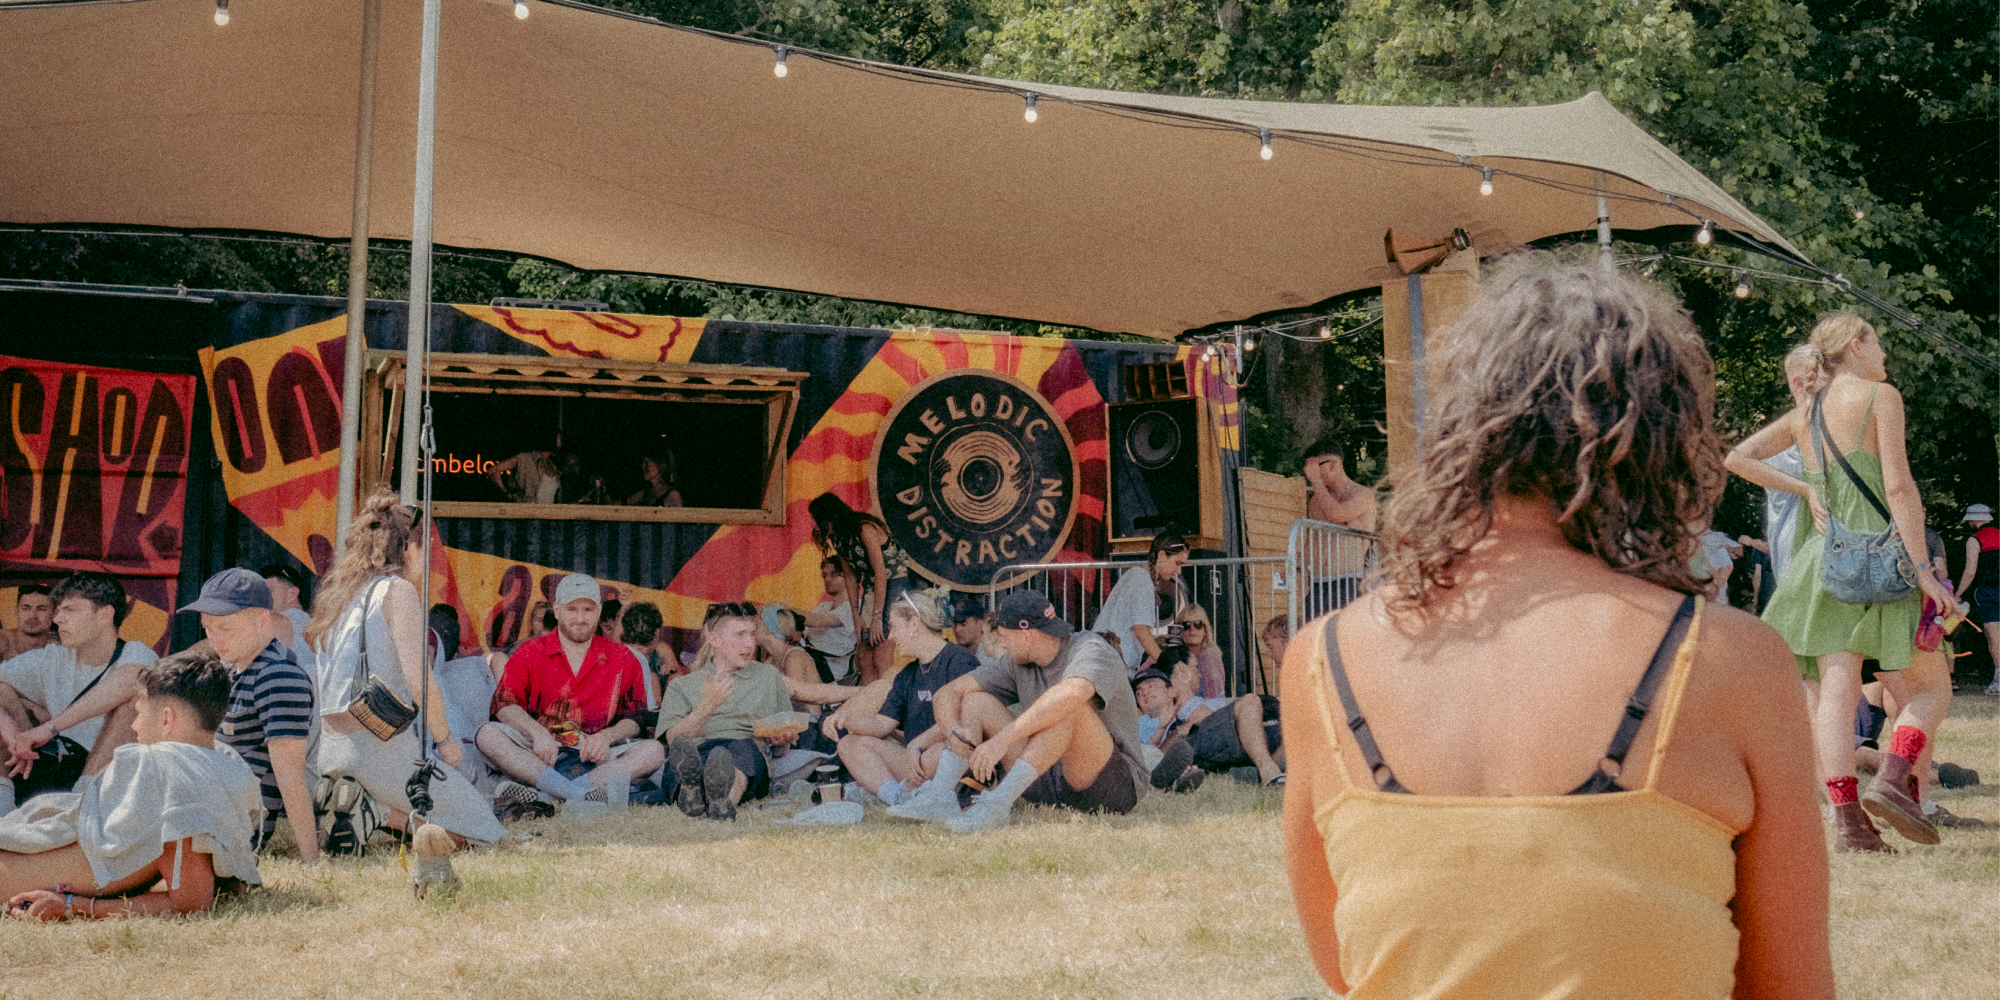 Audio-Technica x Melodic Distraction x NAM Sound System at Gottwood Festival